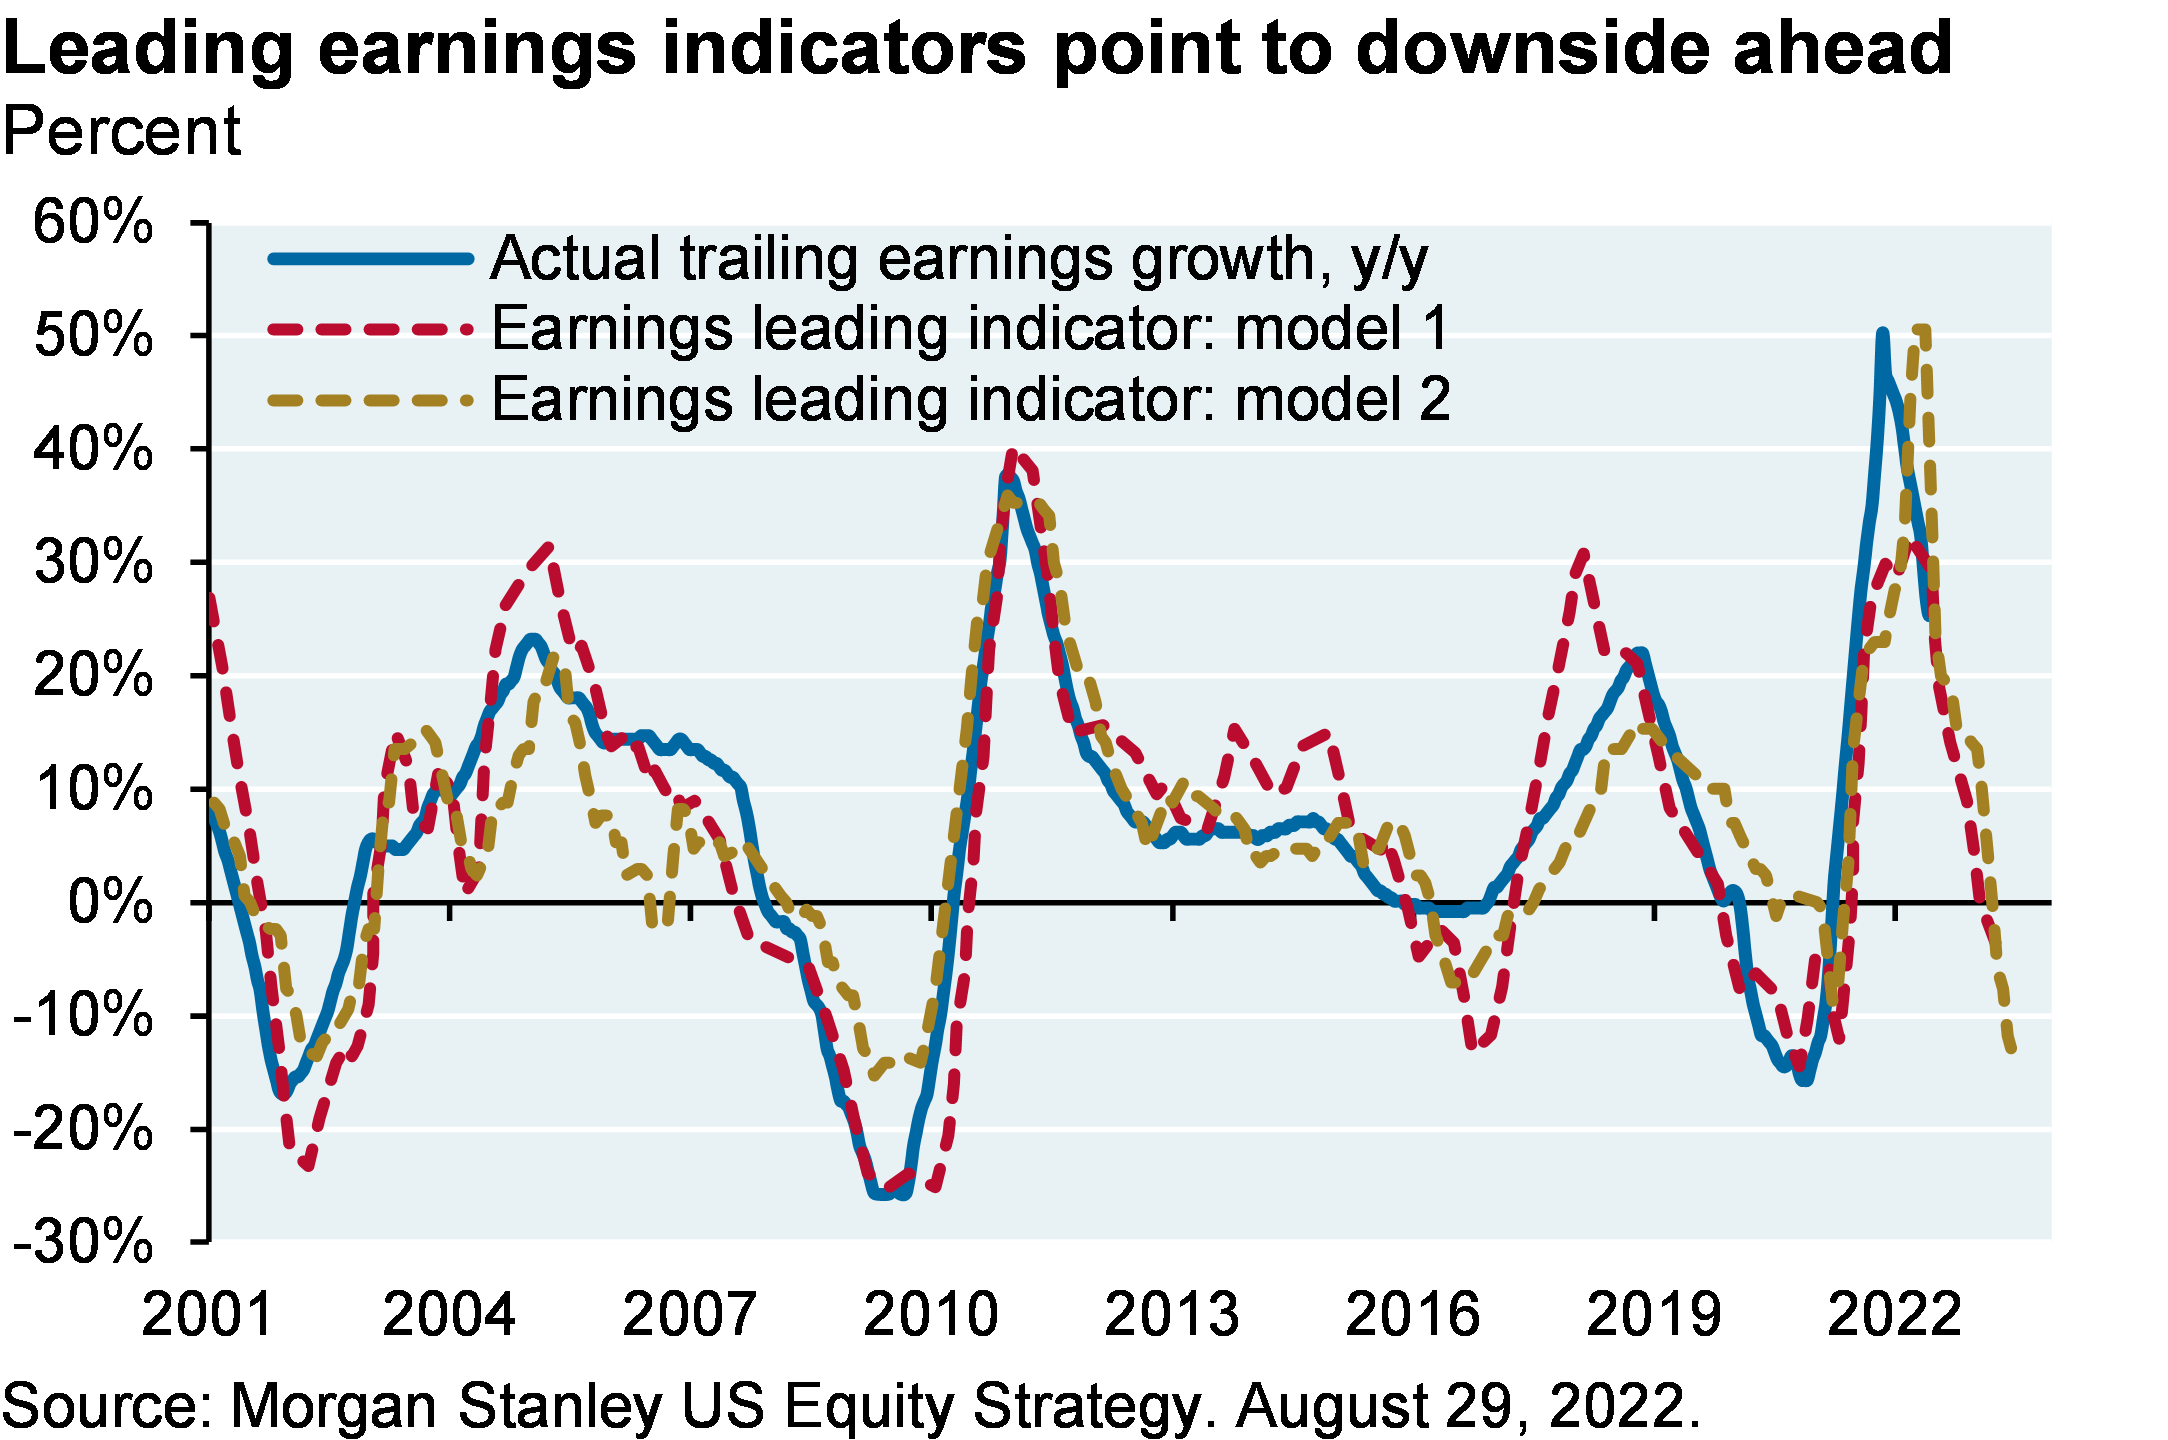 Line chart compares actual trailing earnings growth year-over-year to two earnings leading indicator models from 2001 to now. The models closely follow actual trailing earnings growth and point to more earnings declines ahead.